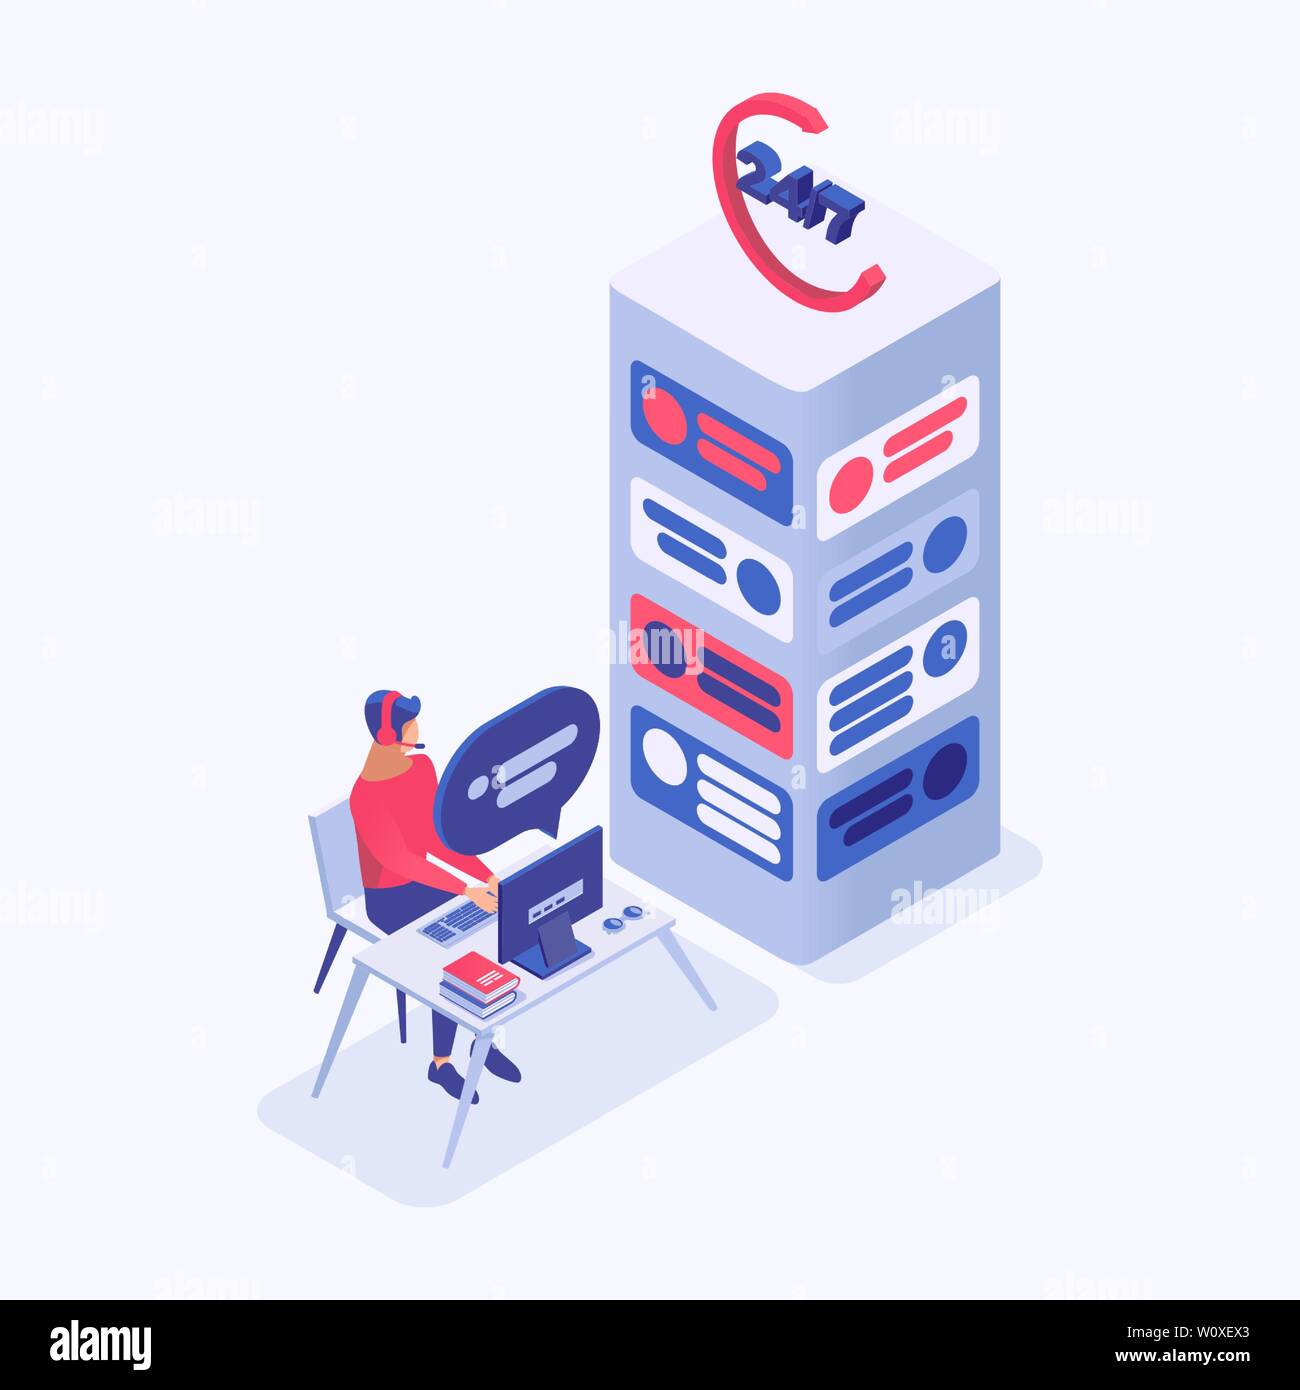 helpline vector isometric illustration. Call center manager, hotline operator 3d cartoon characters. Around the clock online tech support, office worker with headphones sitting at desk Stock Vector